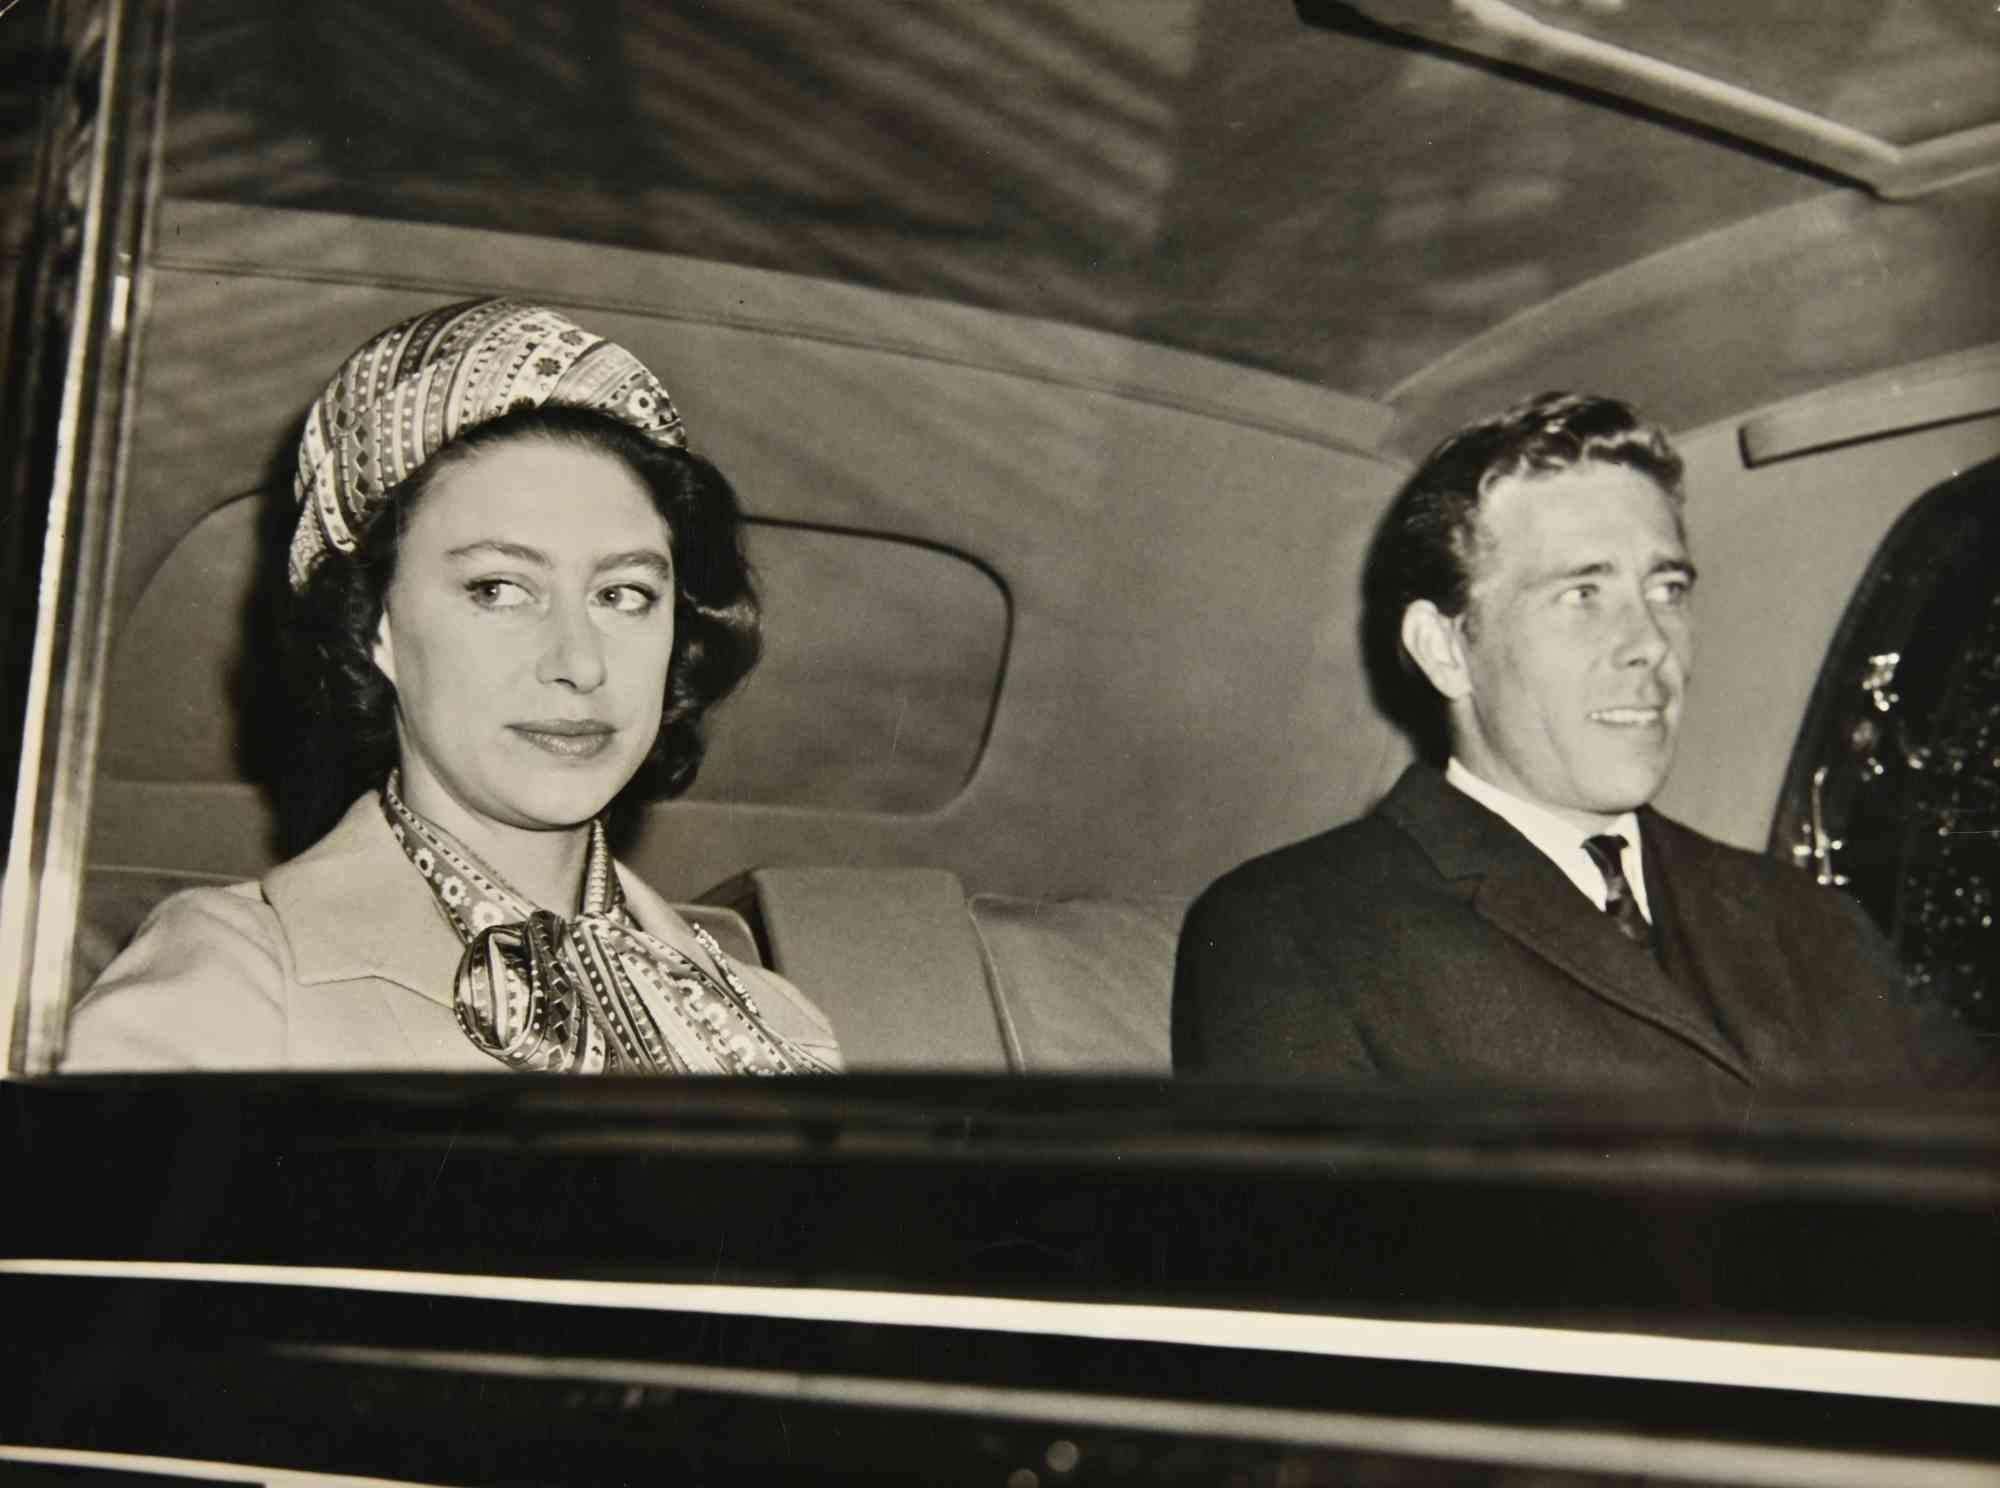 Unknown Portrait Photograph - Princess Margareth and Husband in London - Vintage Photograph - 1962